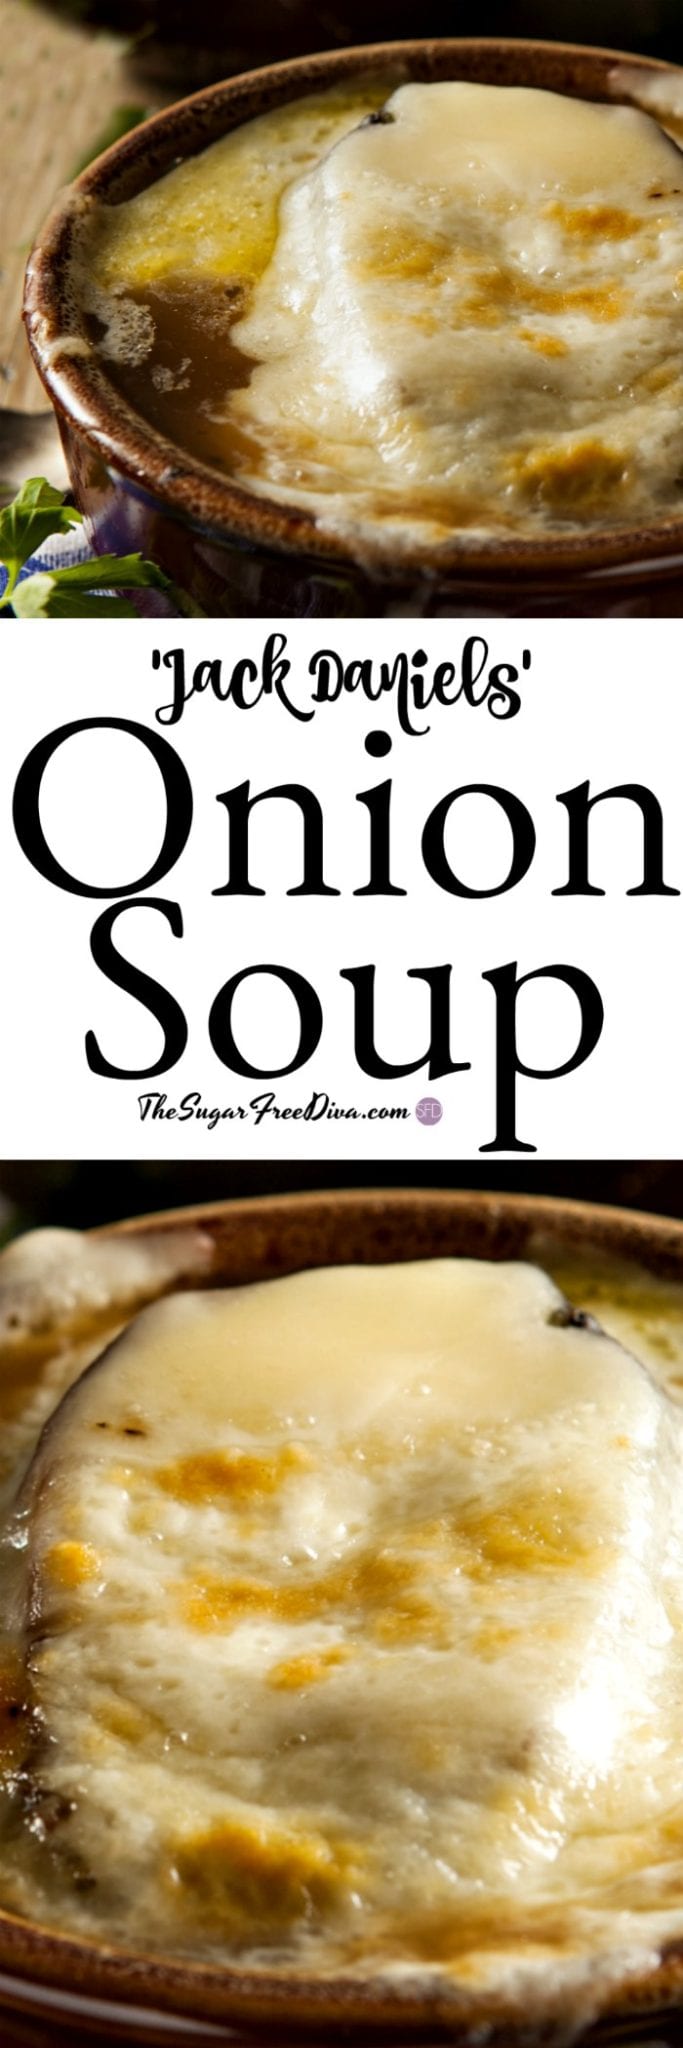 This is how you can make Jack Daniels French Onion Soup